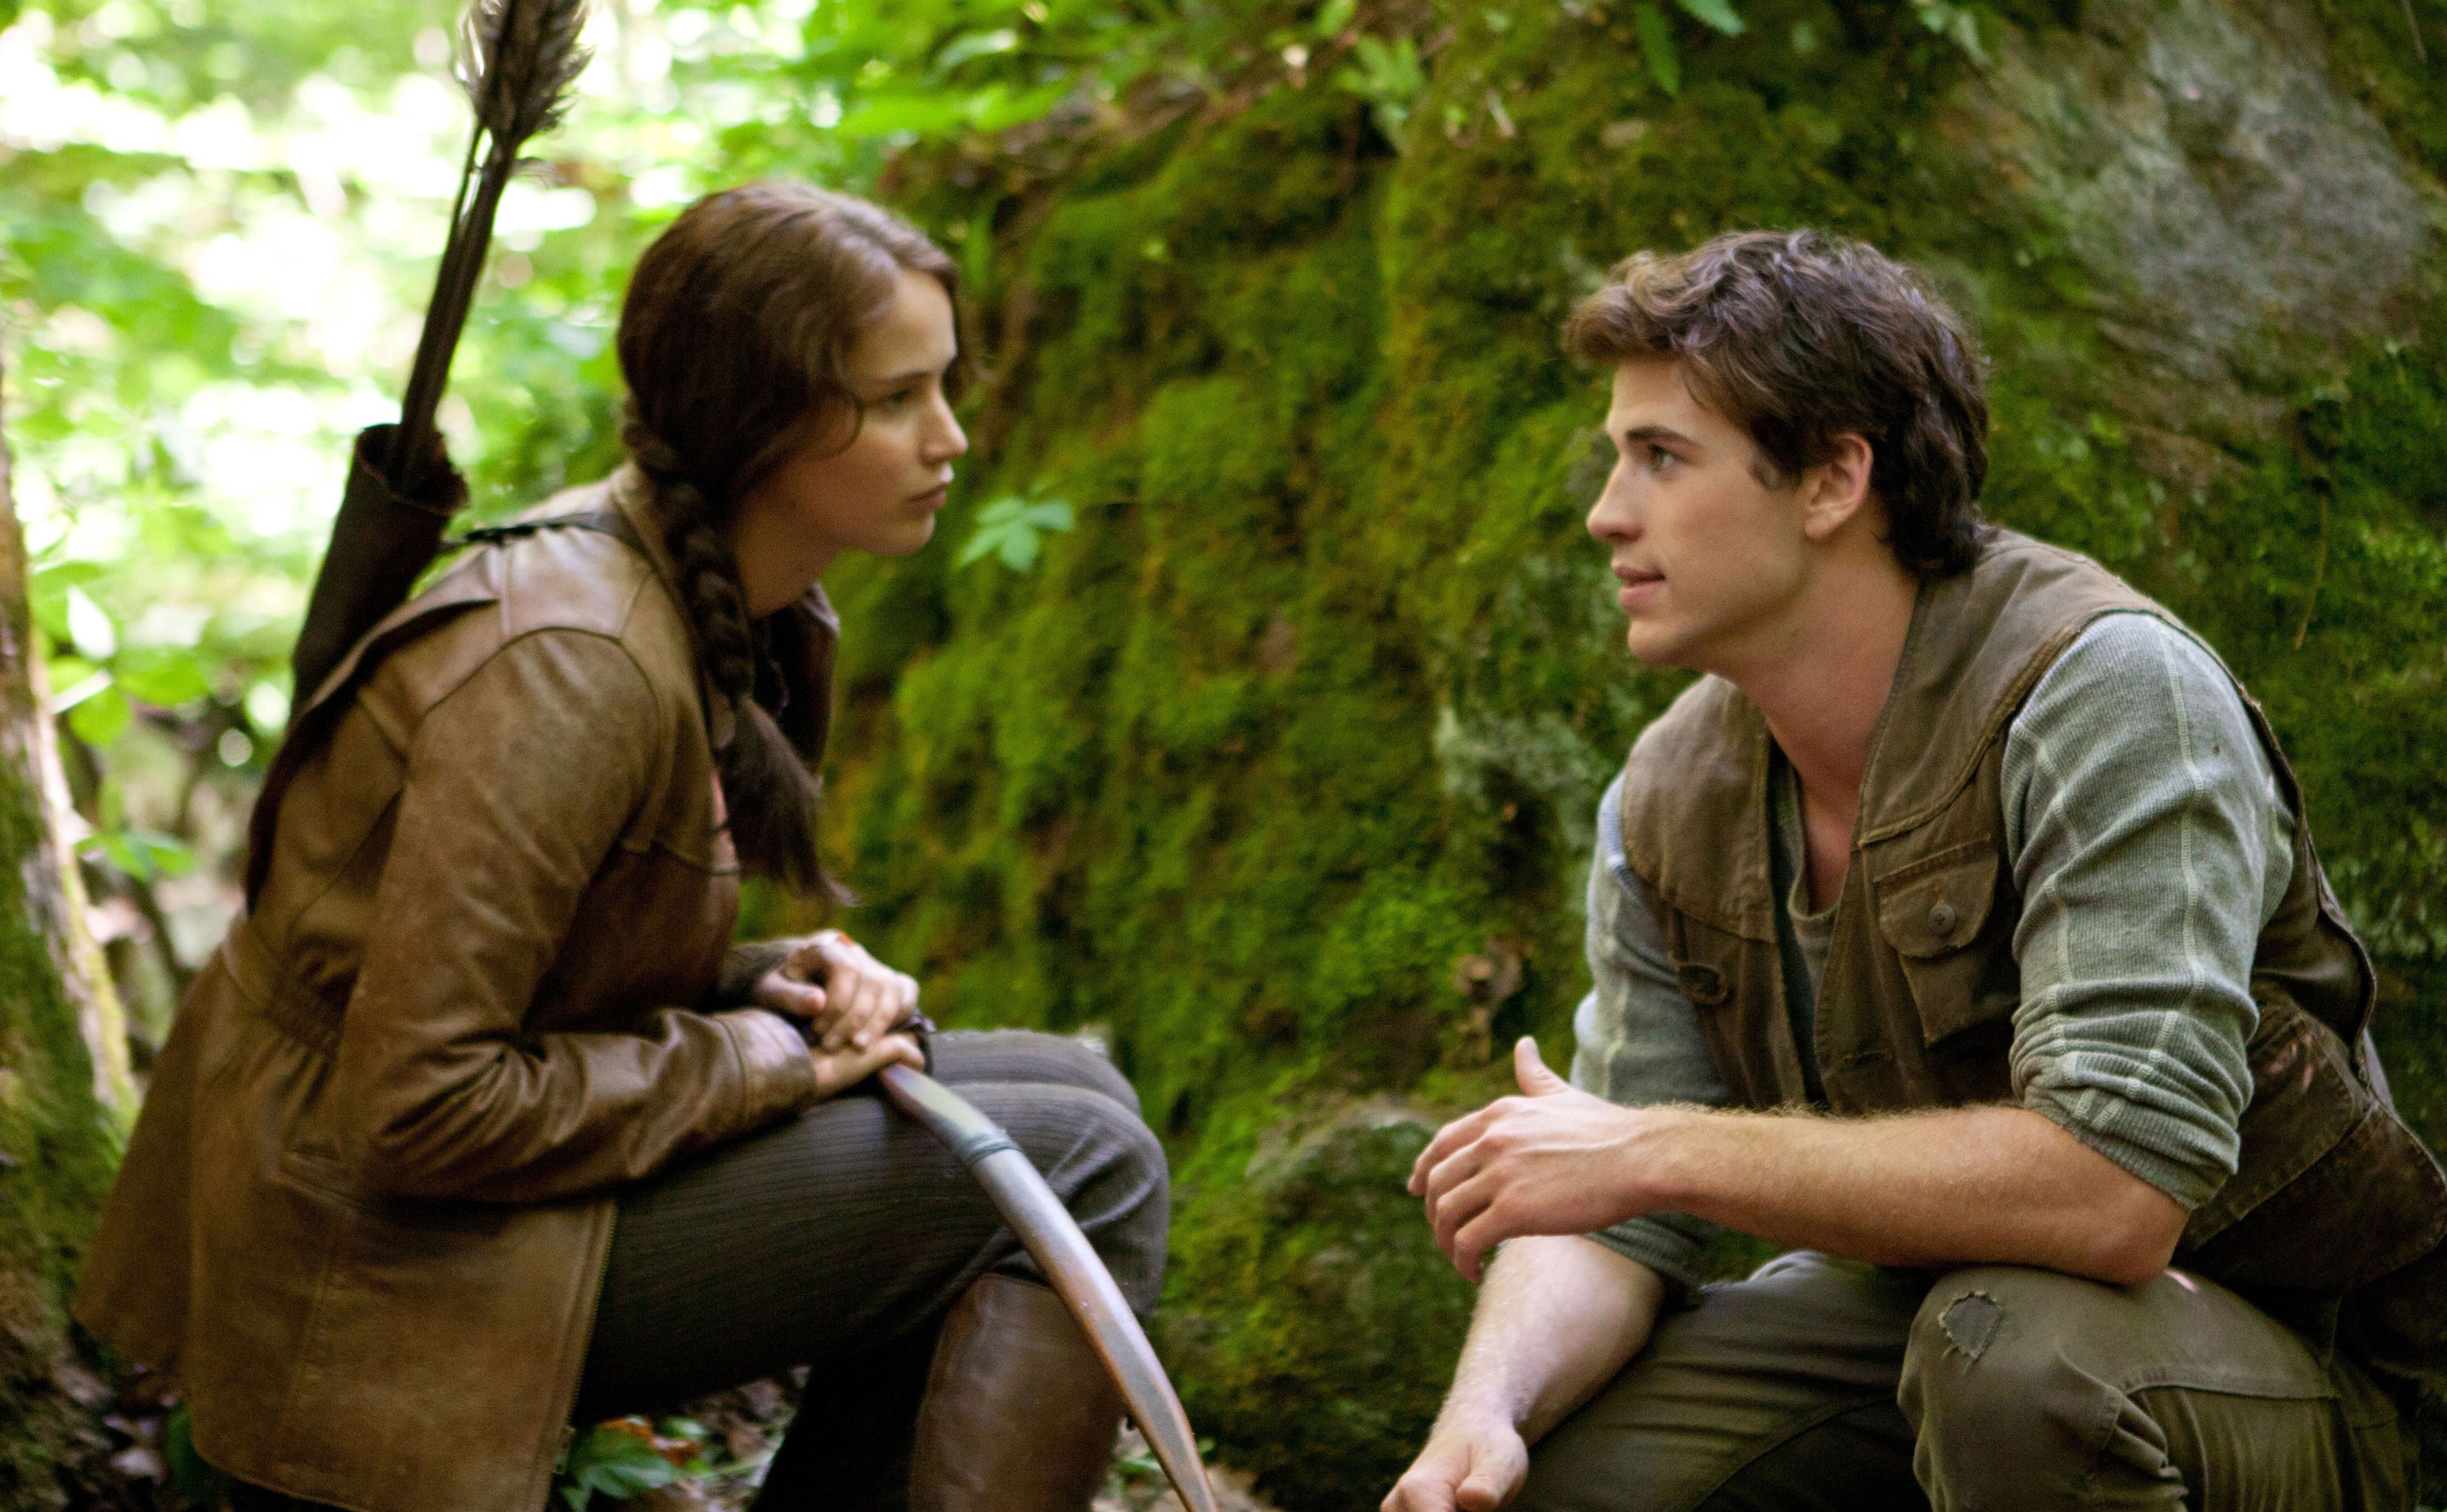 Jennifer Lawrence and Liam Hemsworth in a still from The Hunger Games.